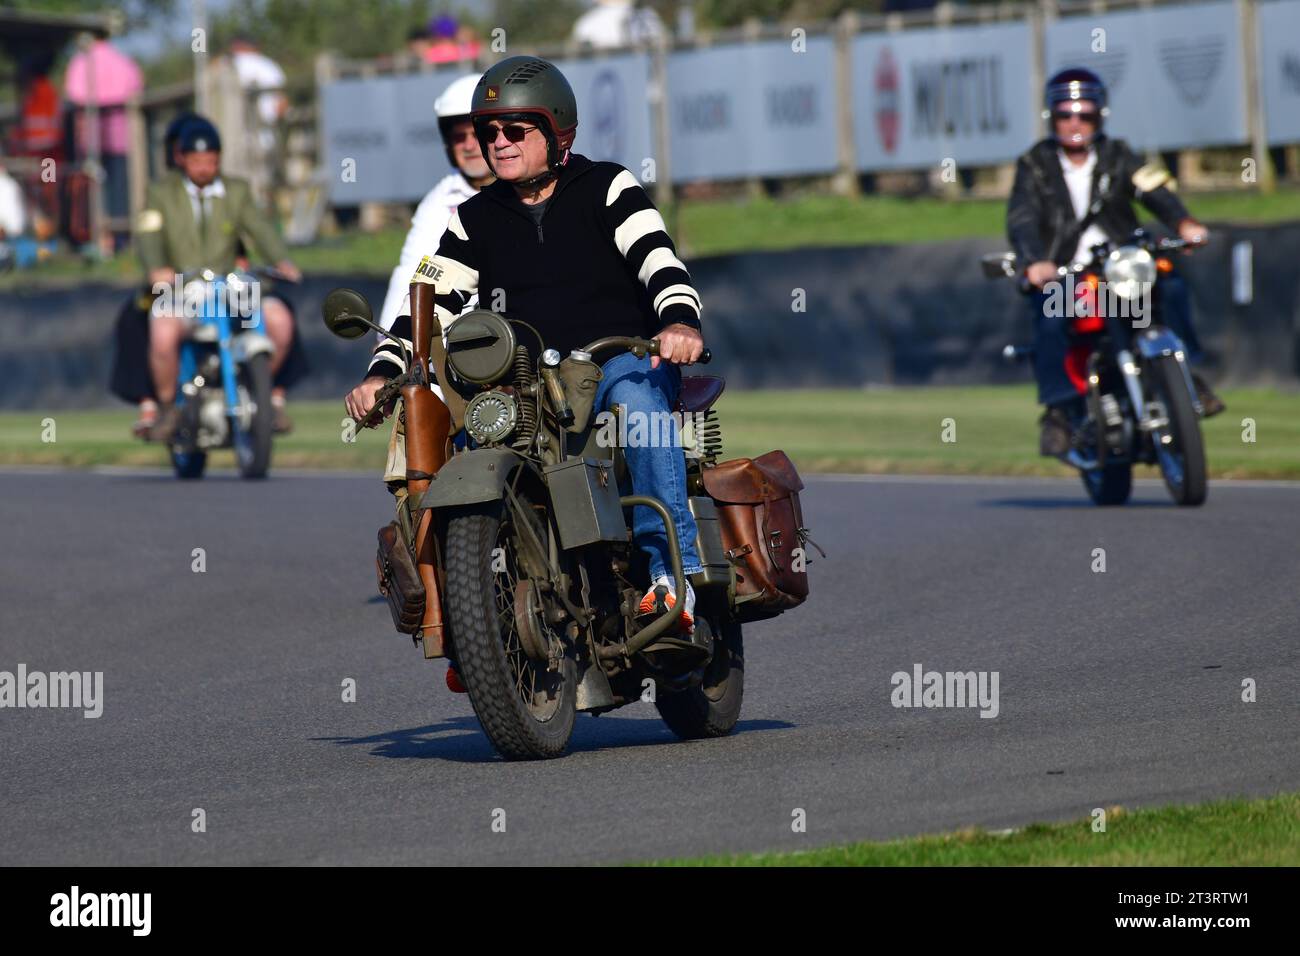 Military Harley Davidson, Track Parade - Motorcycle Celebration, circa 200 bikes featured in the morning parade laps, including sidecar outfits and mo Stock Photo